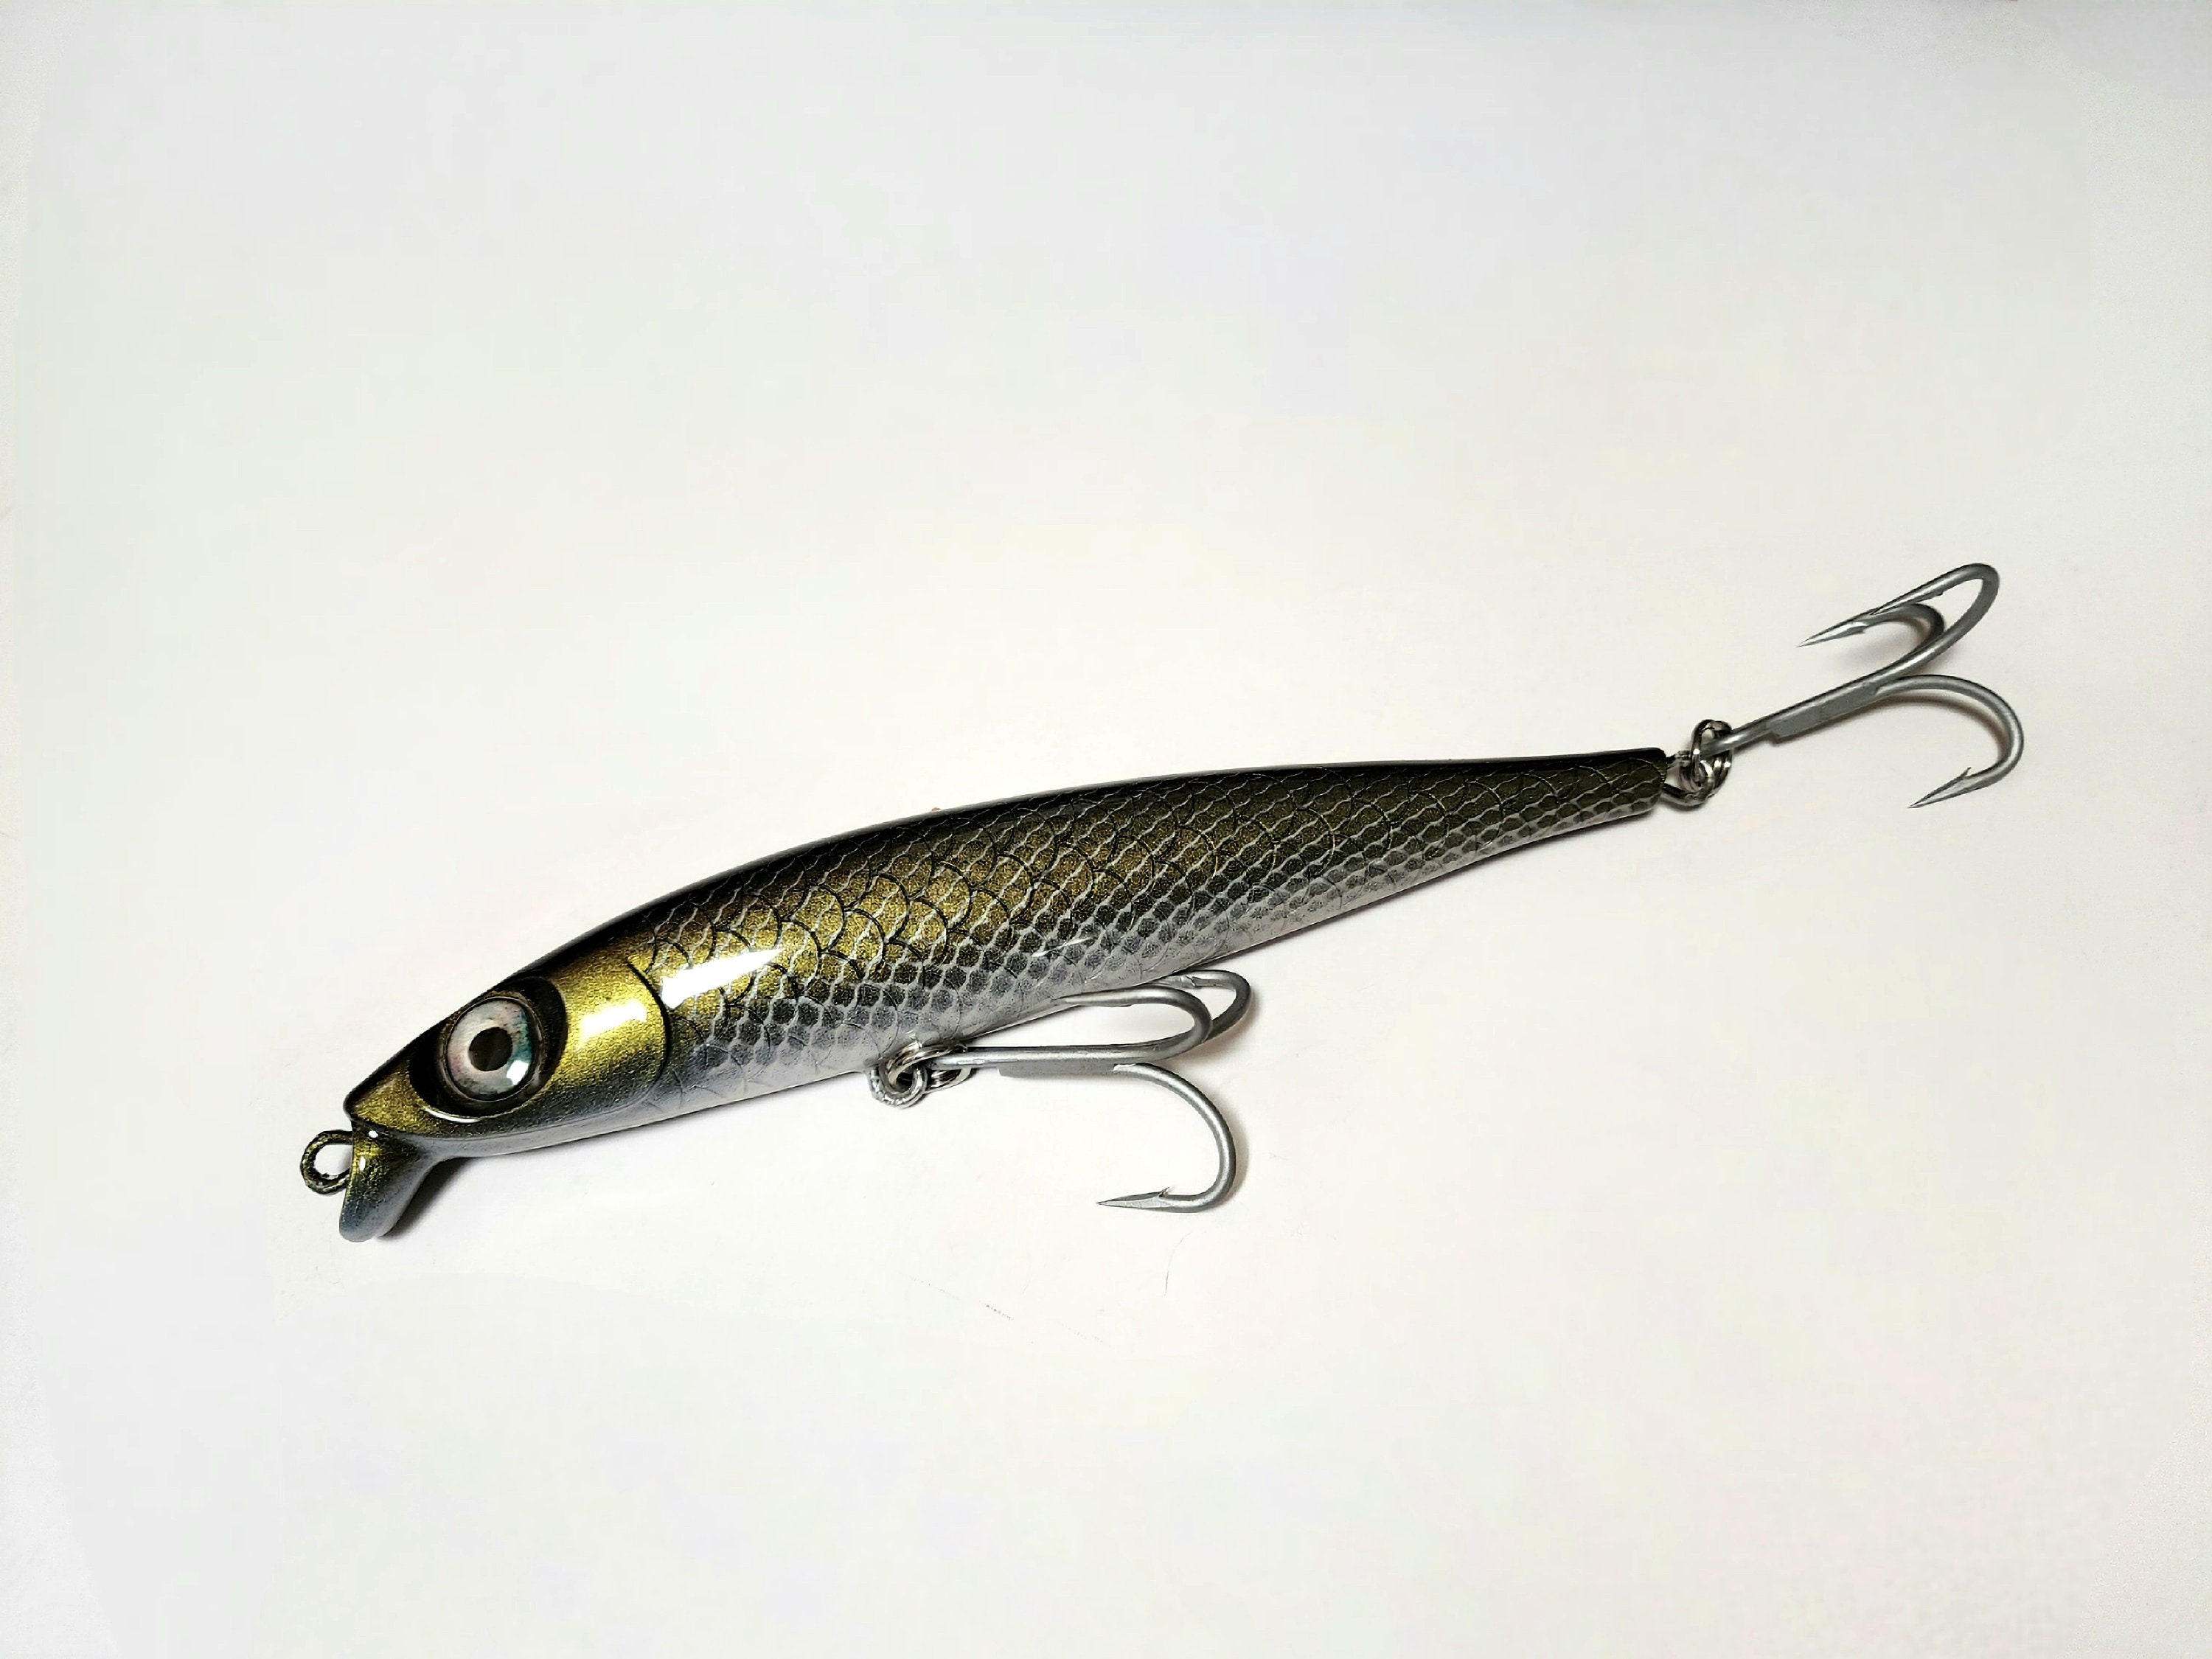 7 Warrior Mega Minnow, Jerkbait, Striped Bass Lures, Saltwater Lures, Bass  Fishing Lures, Custom Fishing Lures, Musky Lures 